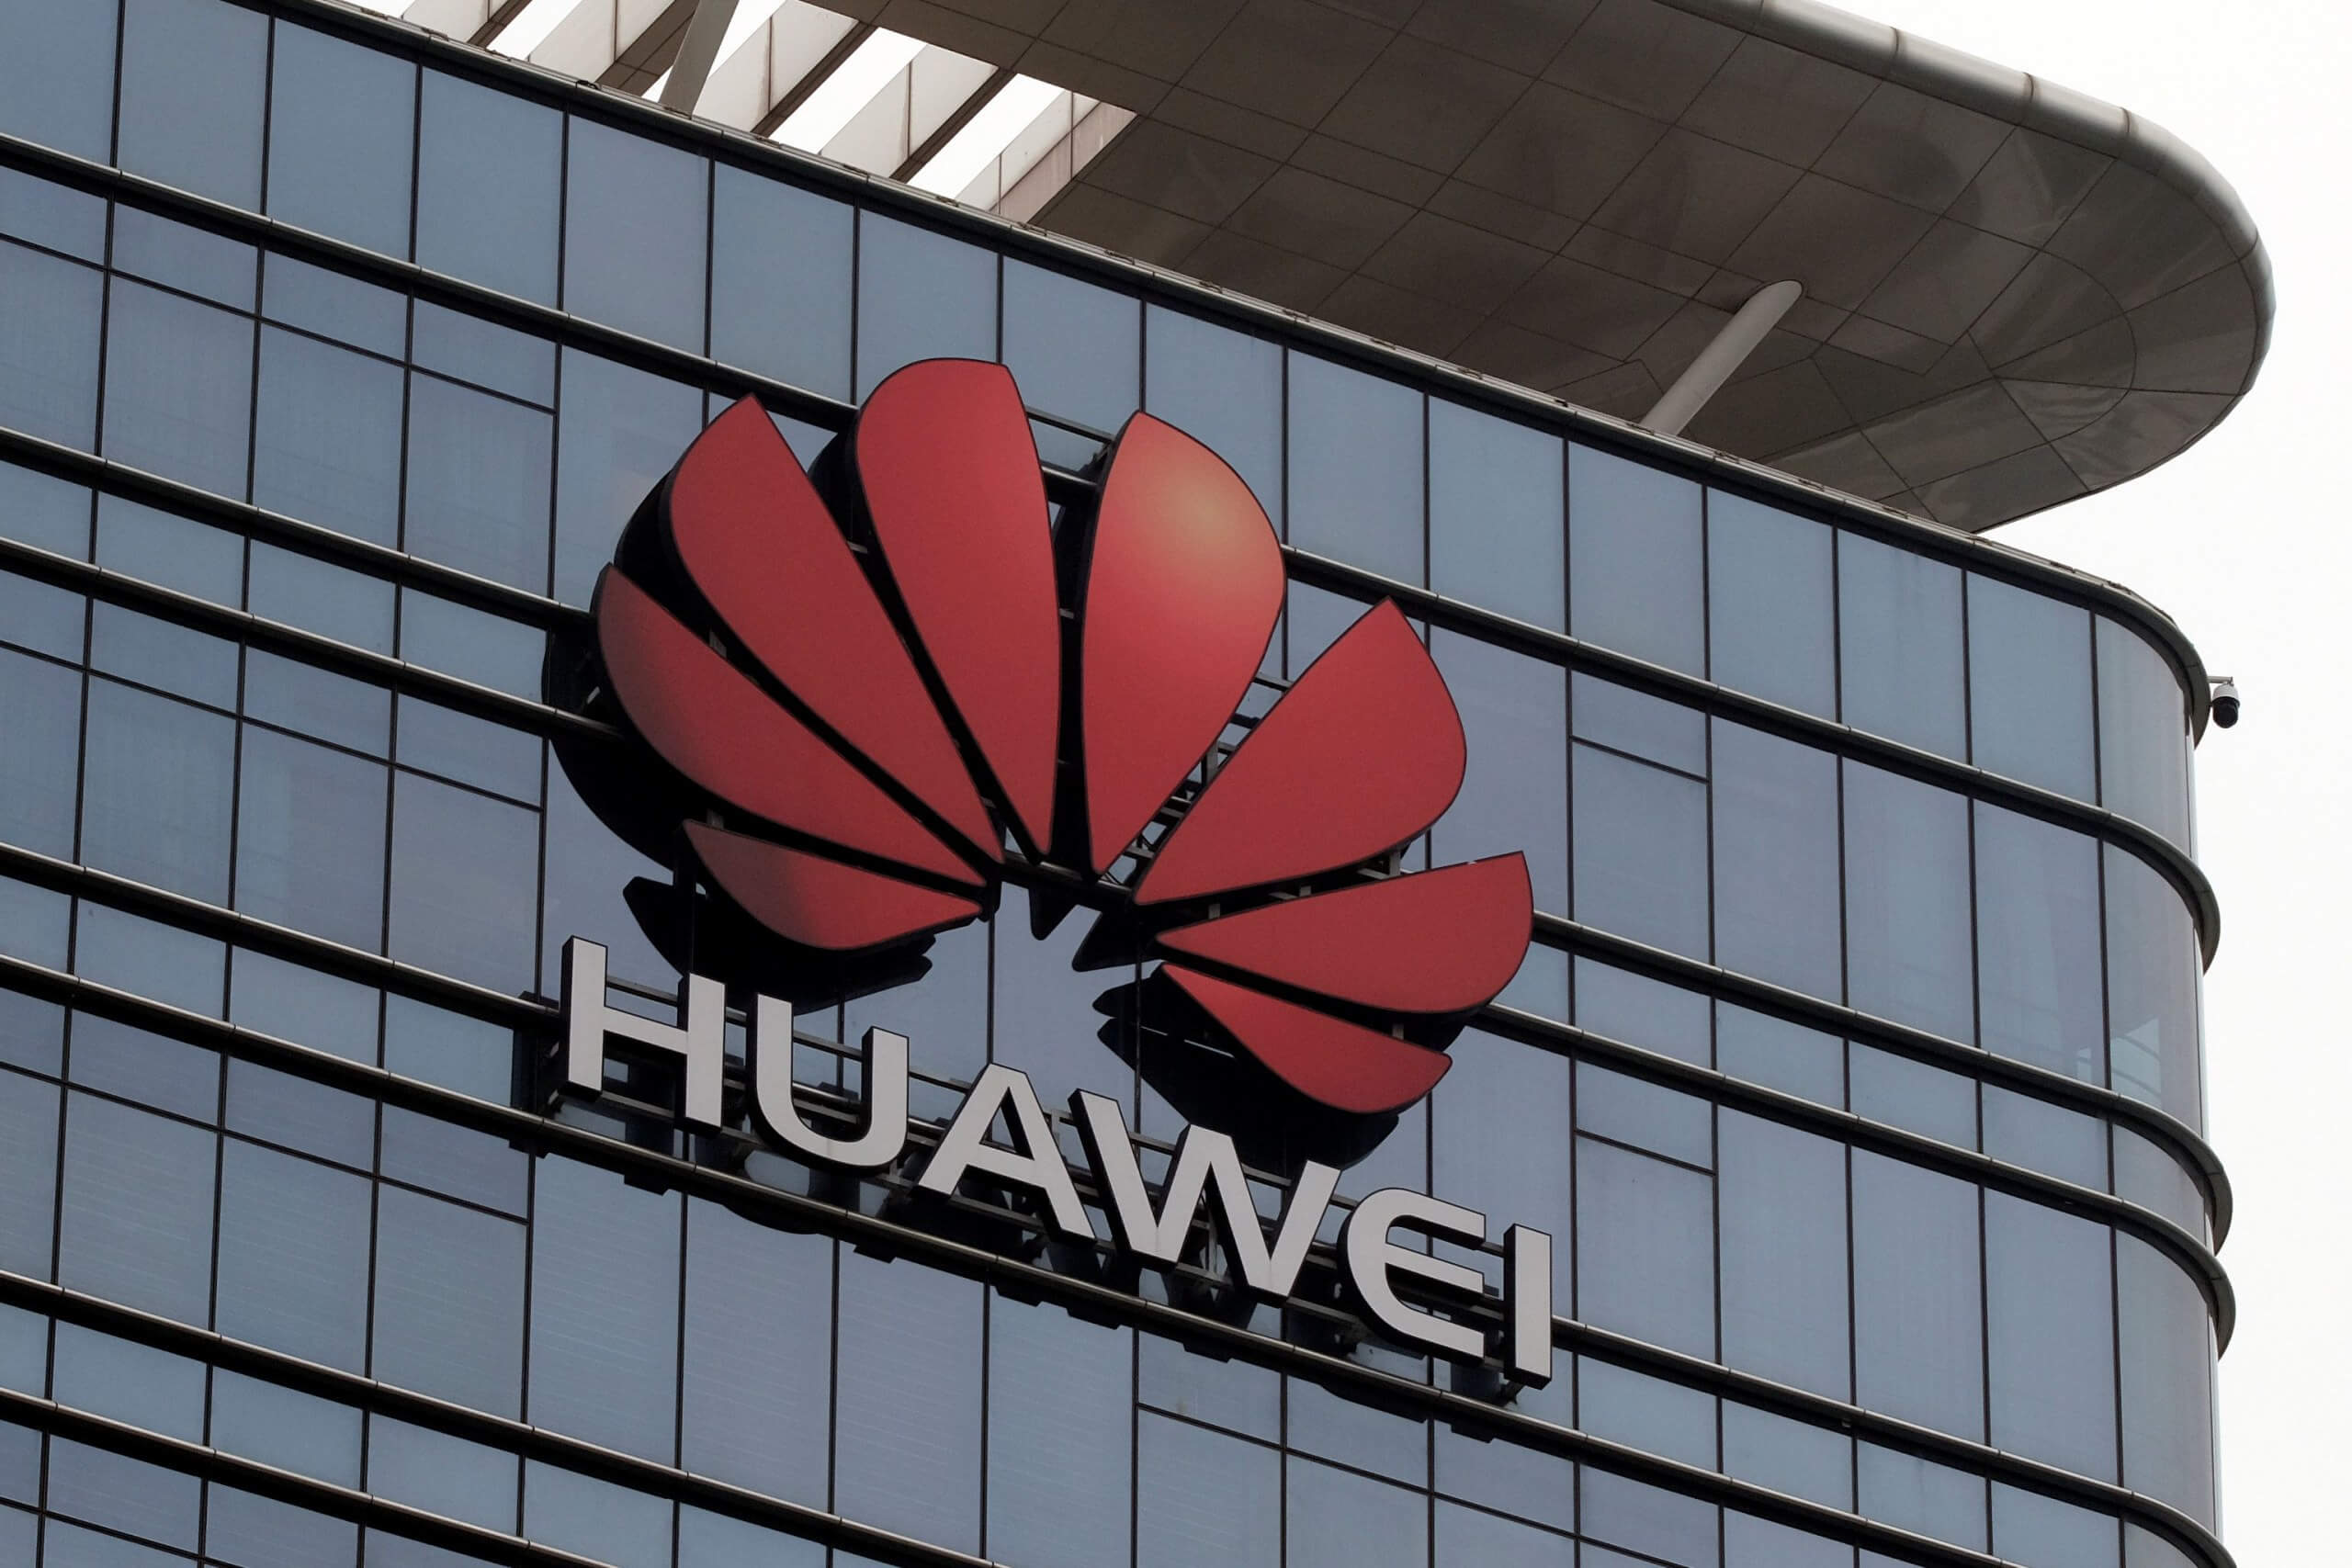 Huawei says vulnerabilities discovered by Vodafone were 'weaknesses,' not 'hidden backdoors'